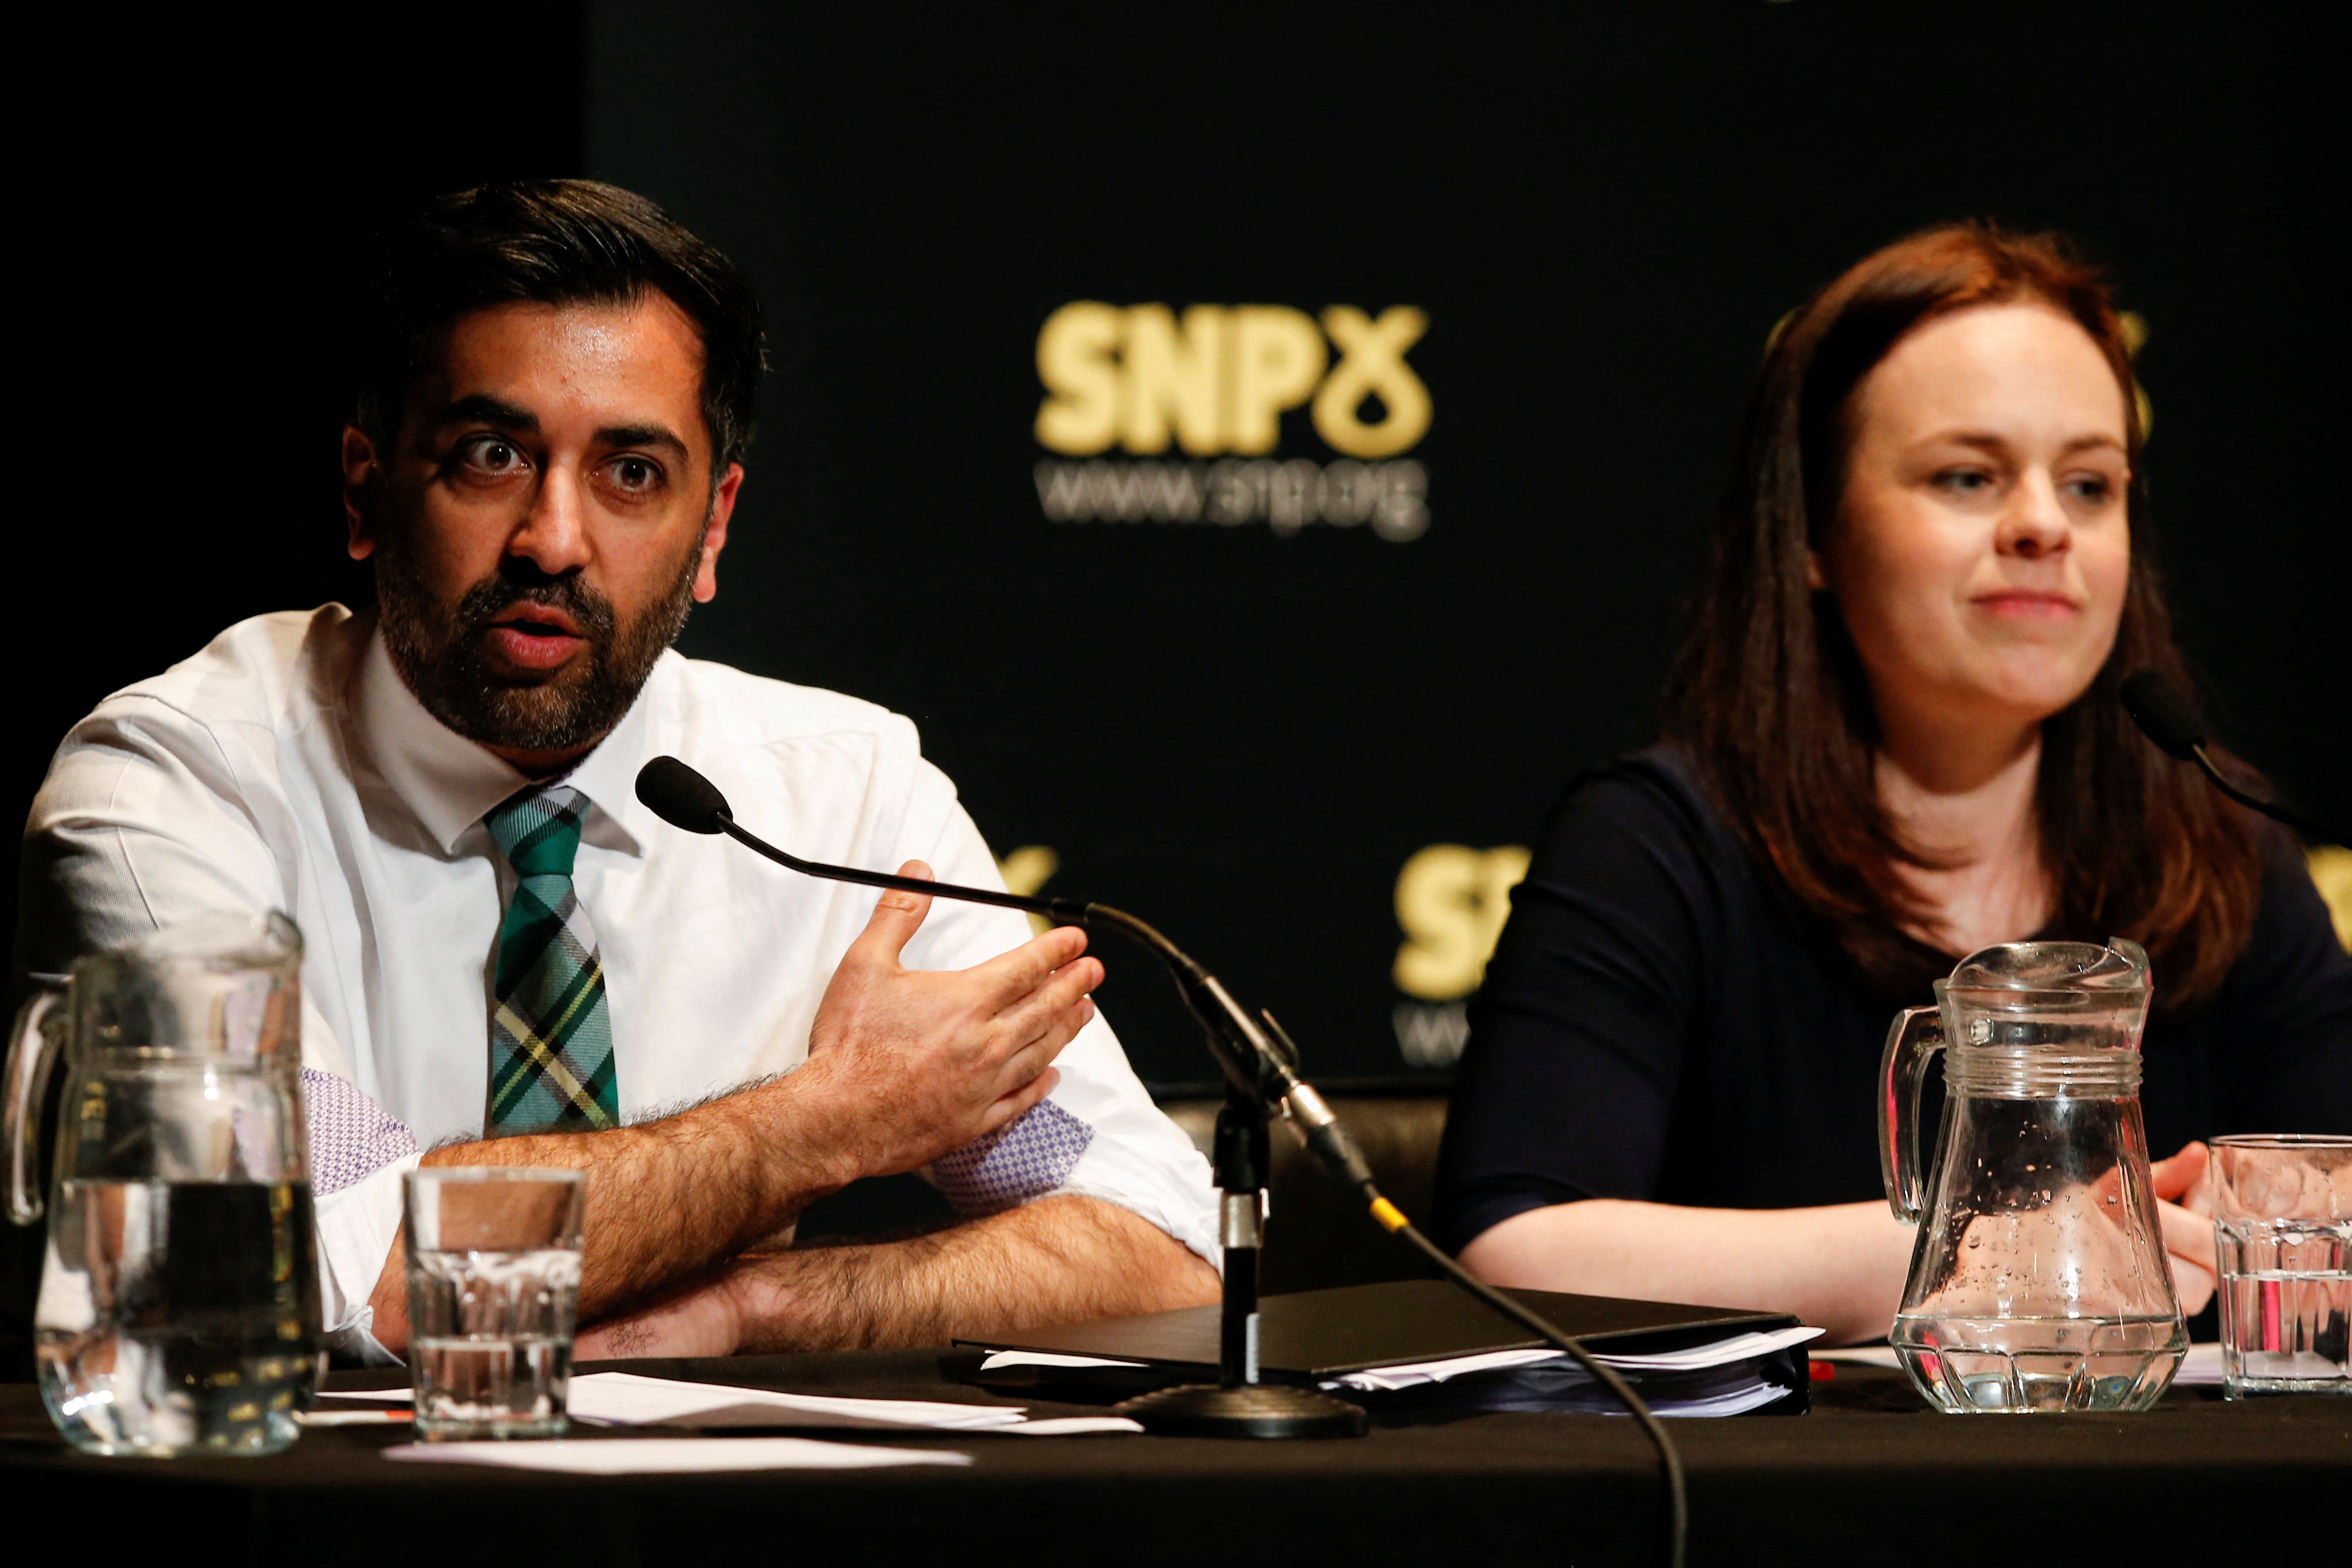 SNP leadership candidates Humza Yousaf and Kate Forbes